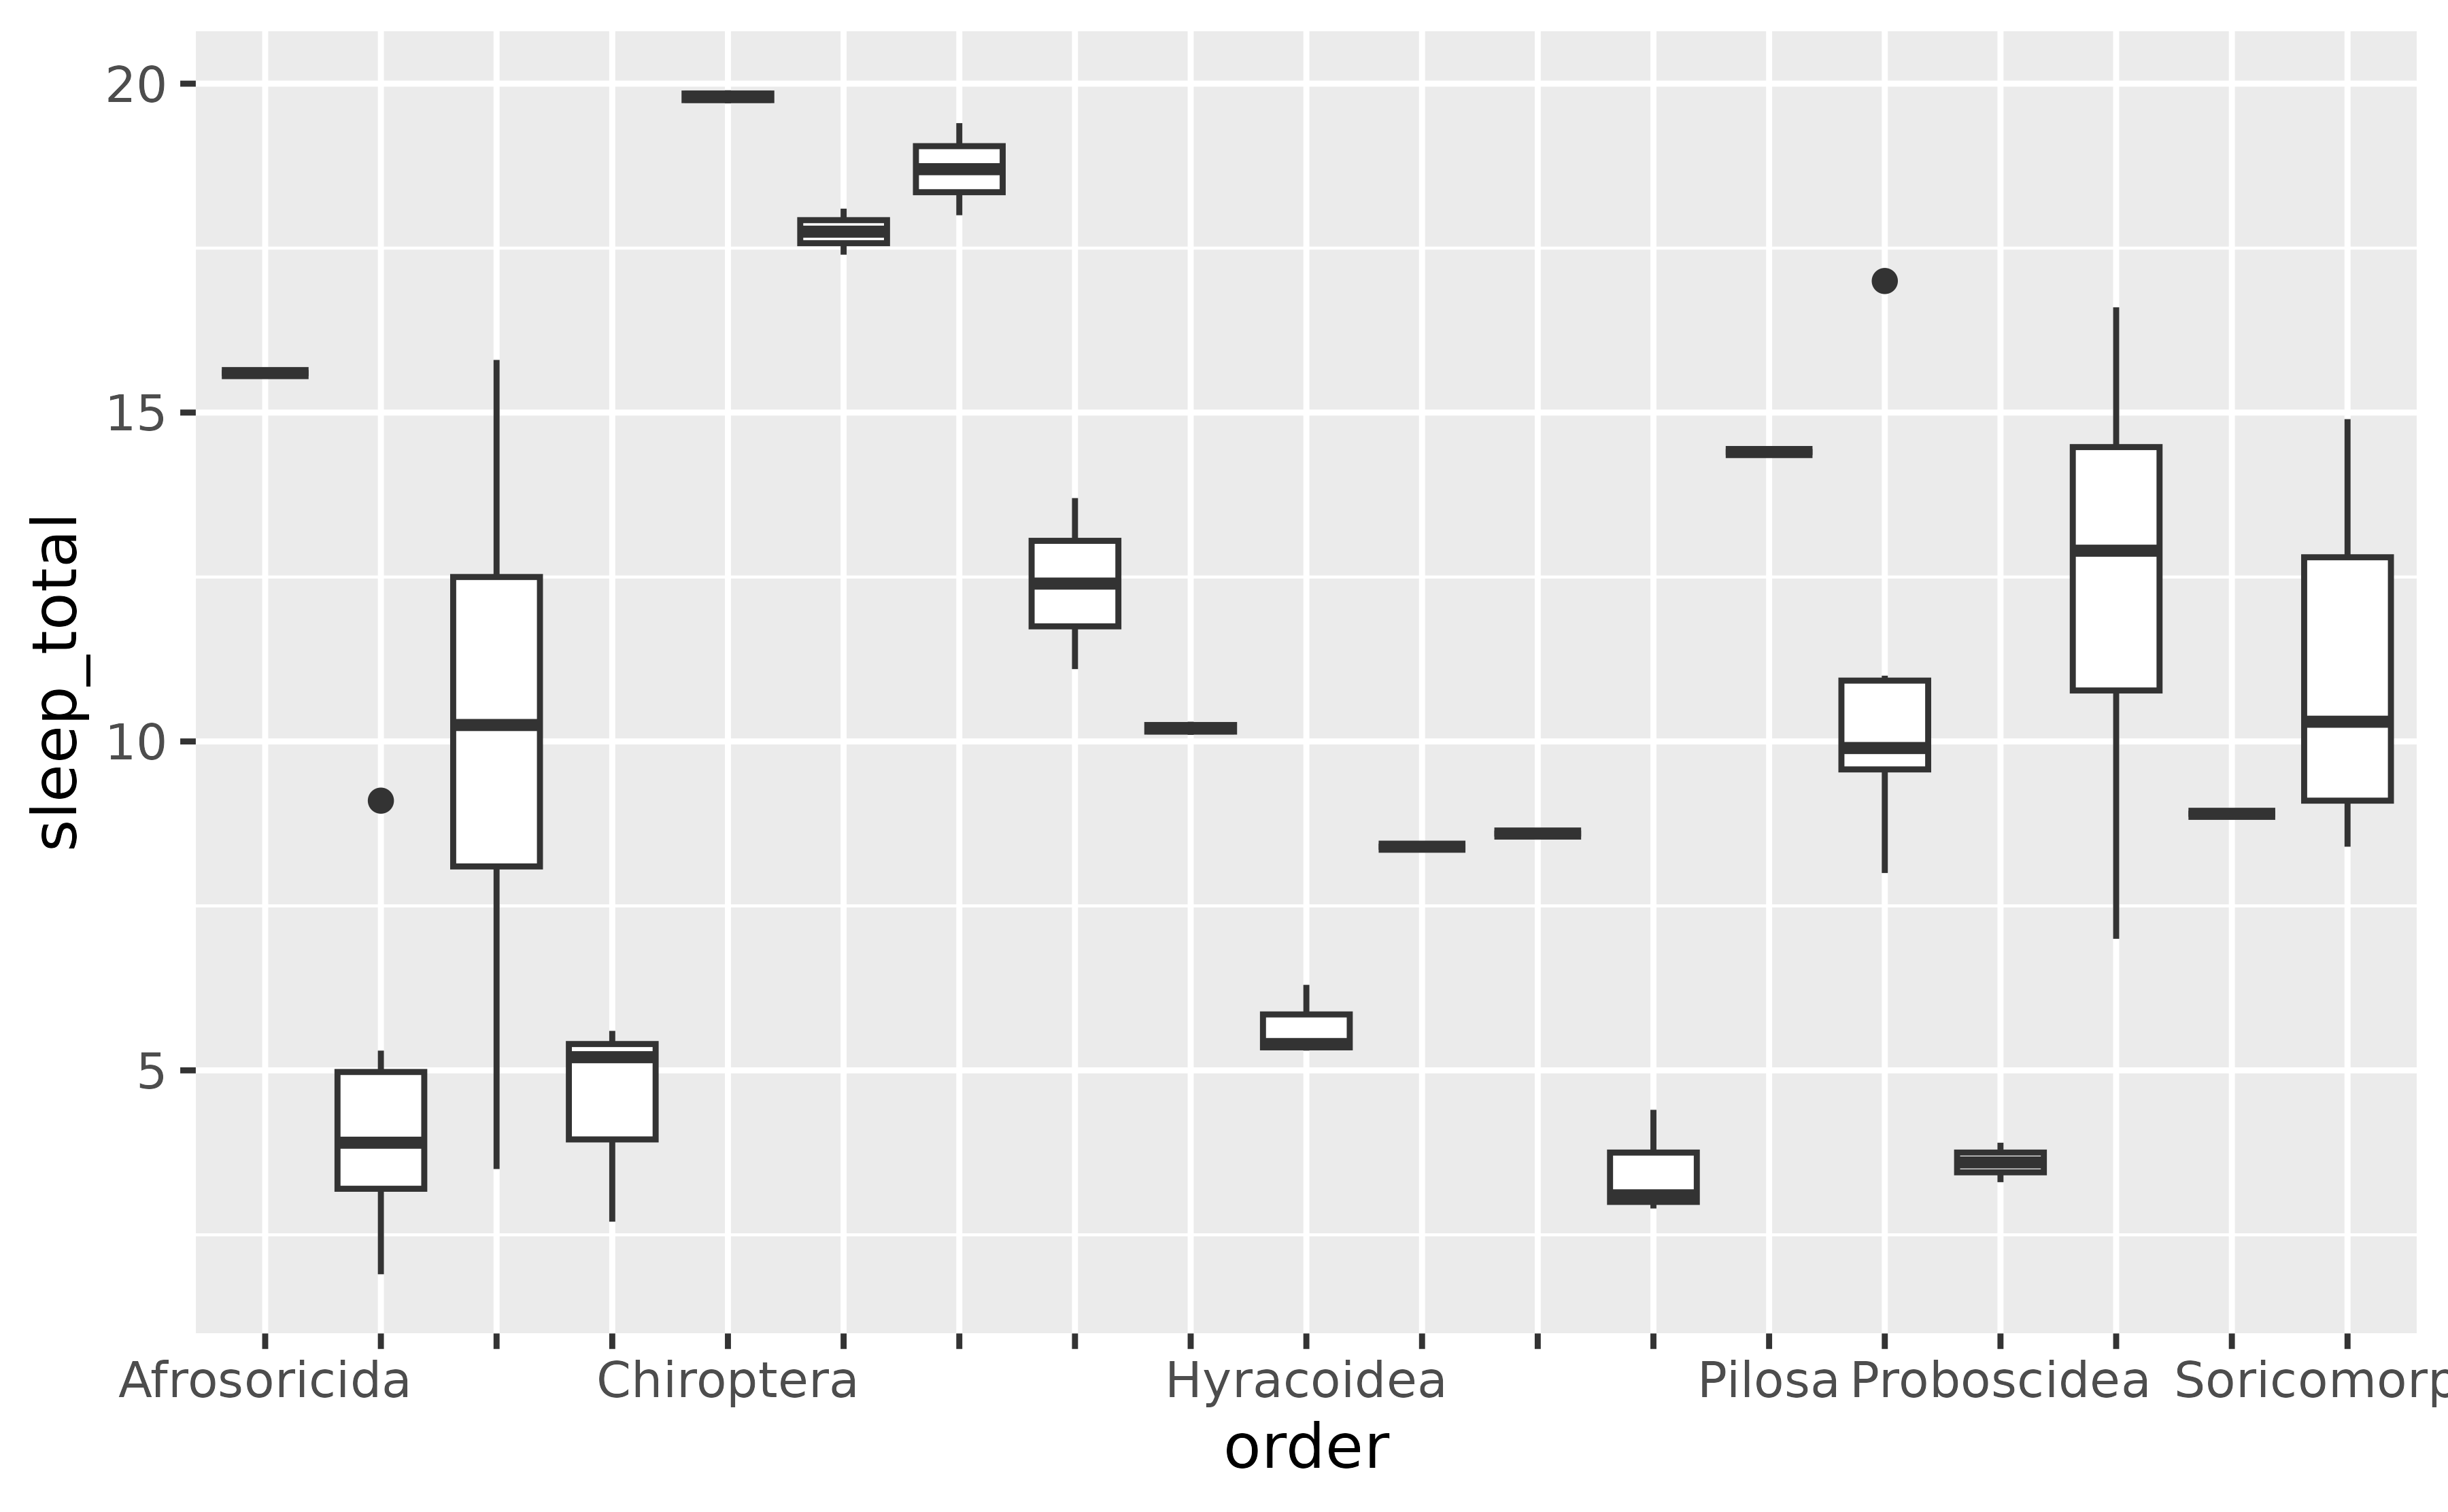 A boxplot showing the total amount of sleep on the y-axis for 19 taxonomical orders of mammals on the x-axis. Several of the x-axis labels have been omitted, but the one that remain are readable and don't overlap.